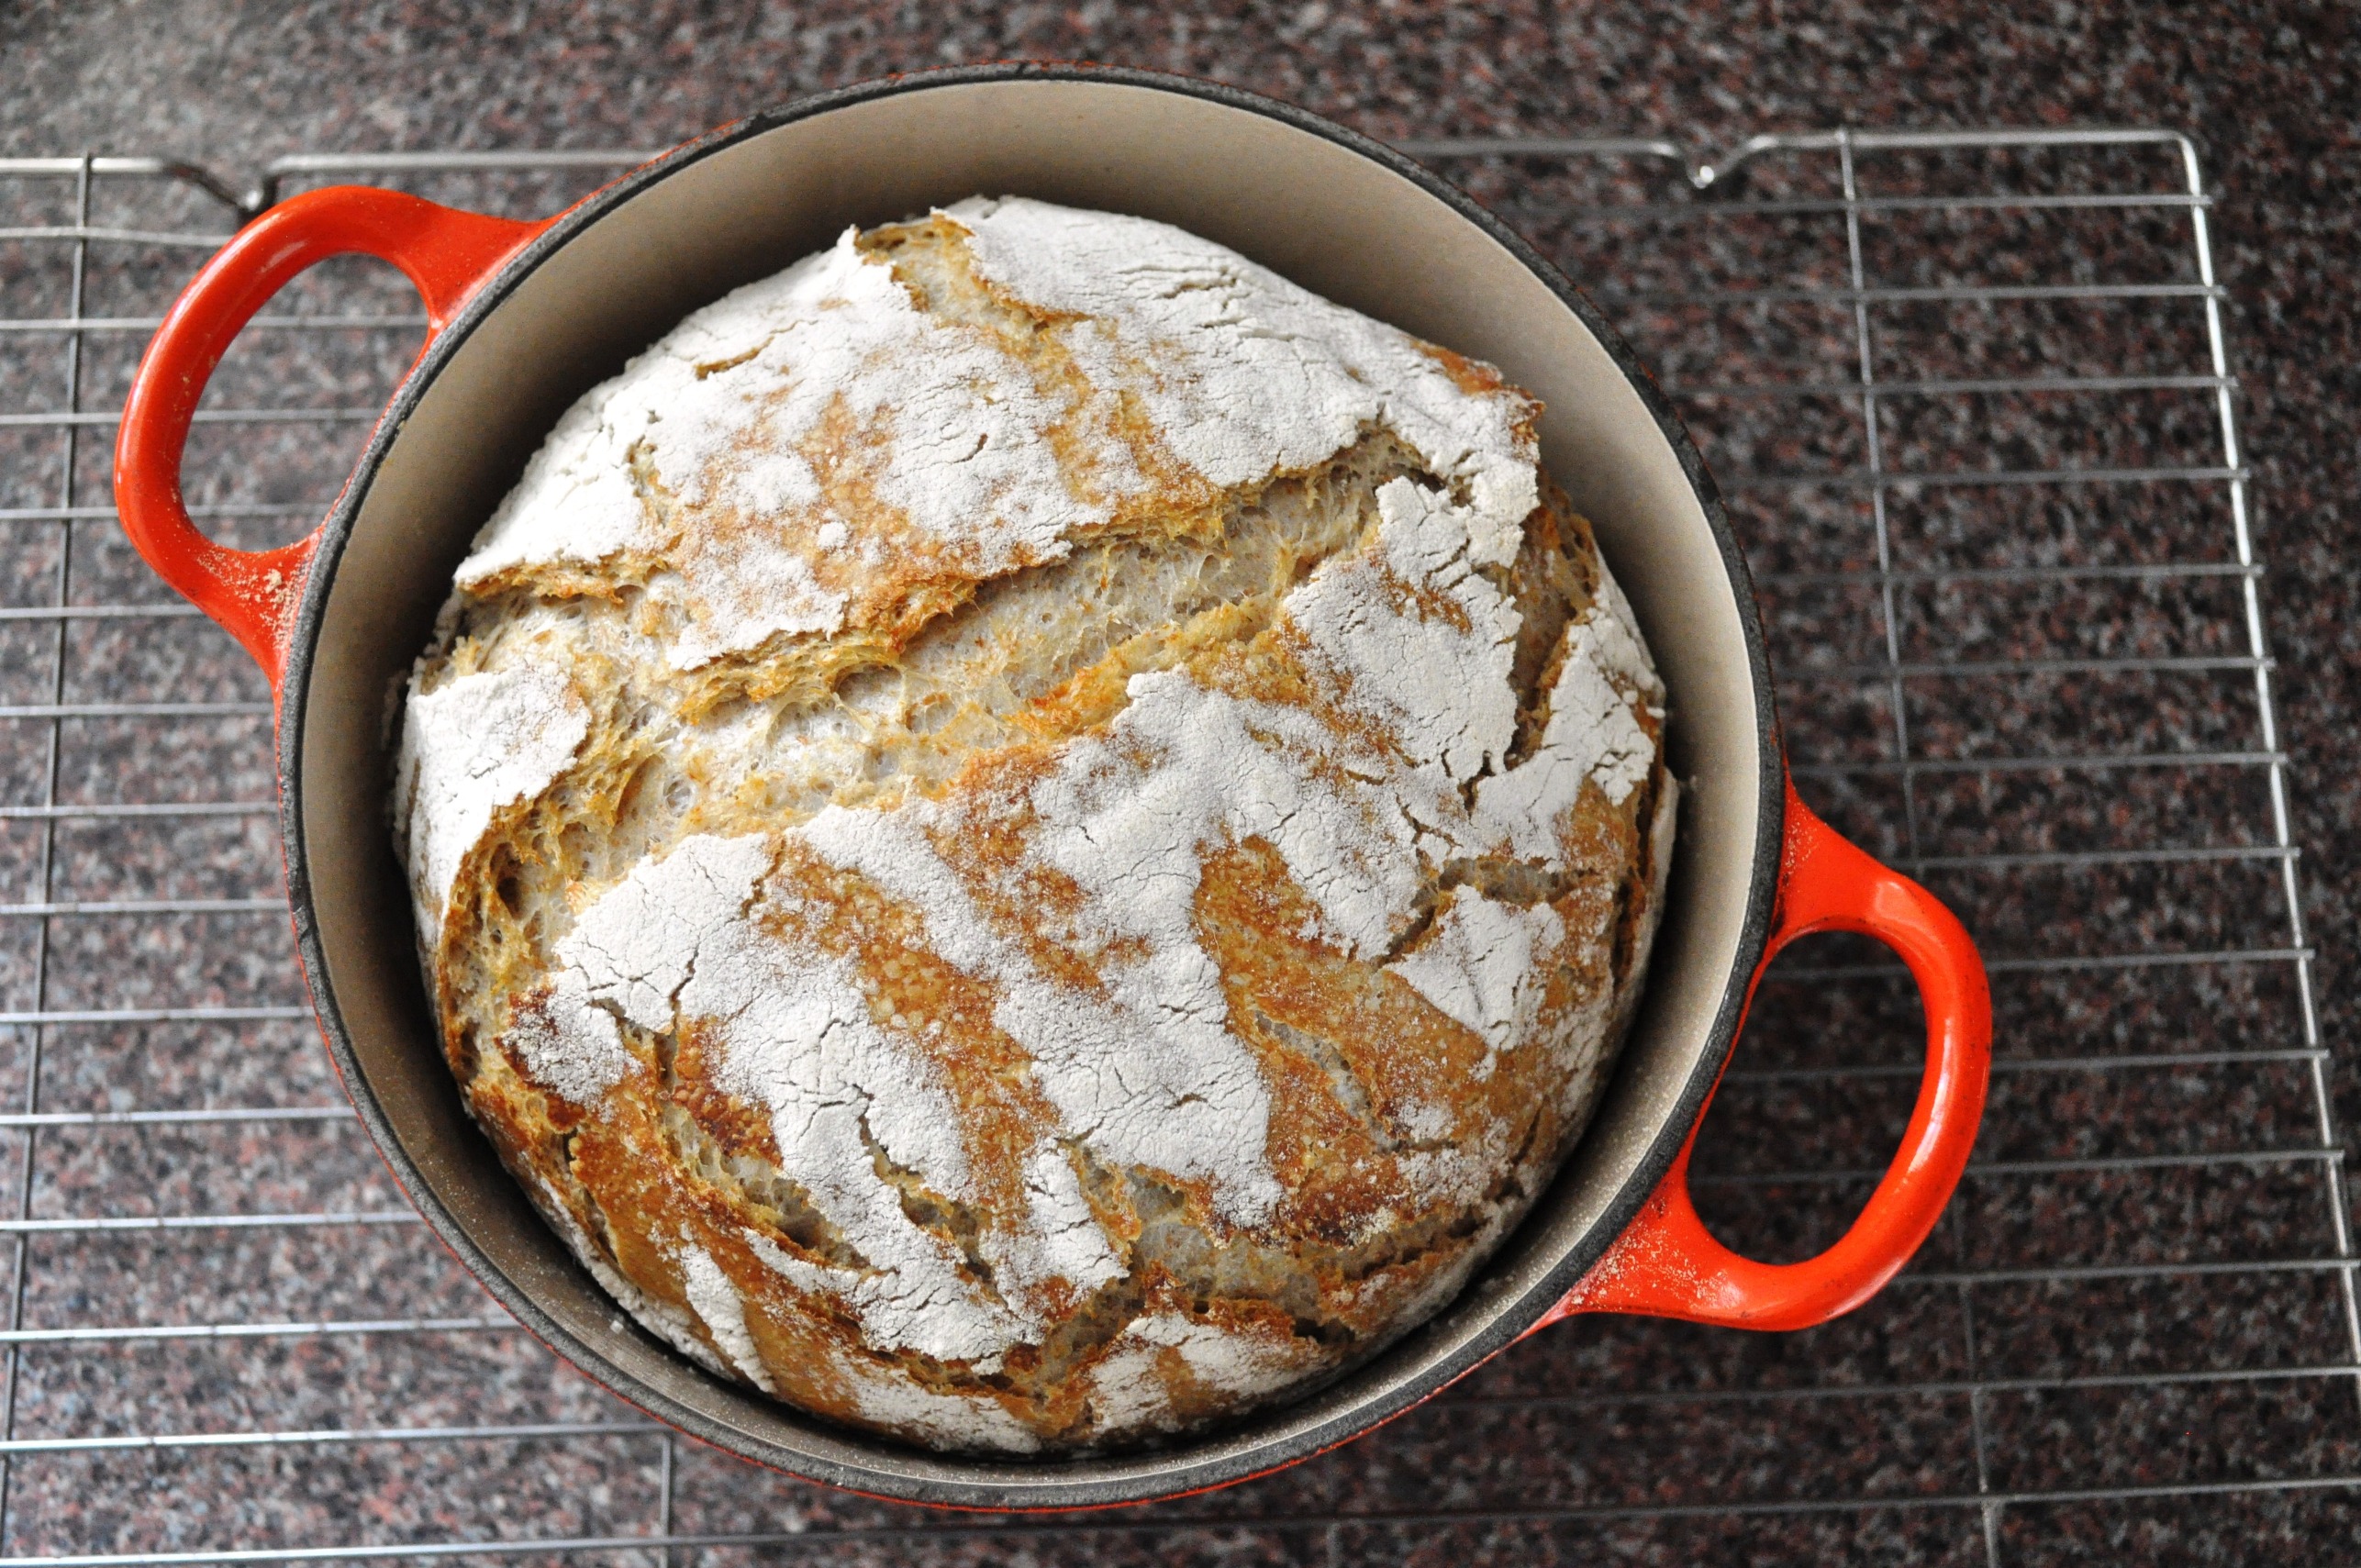 Baking Bread in a Le Creuset Dutch Oven